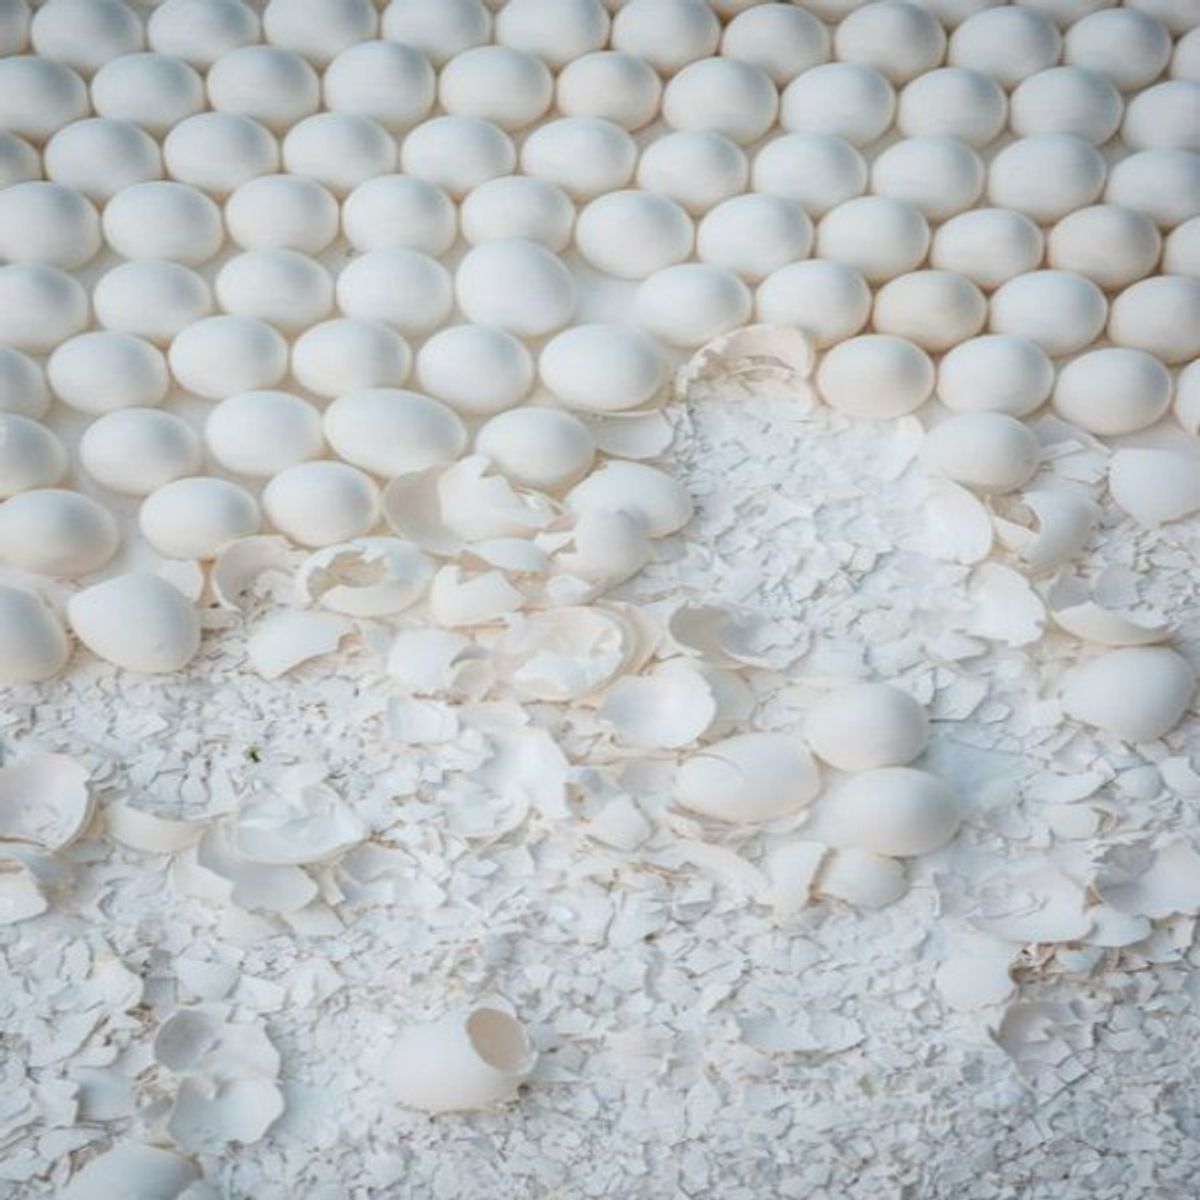 Sleeping, Standing And Dreaming On Eggshells